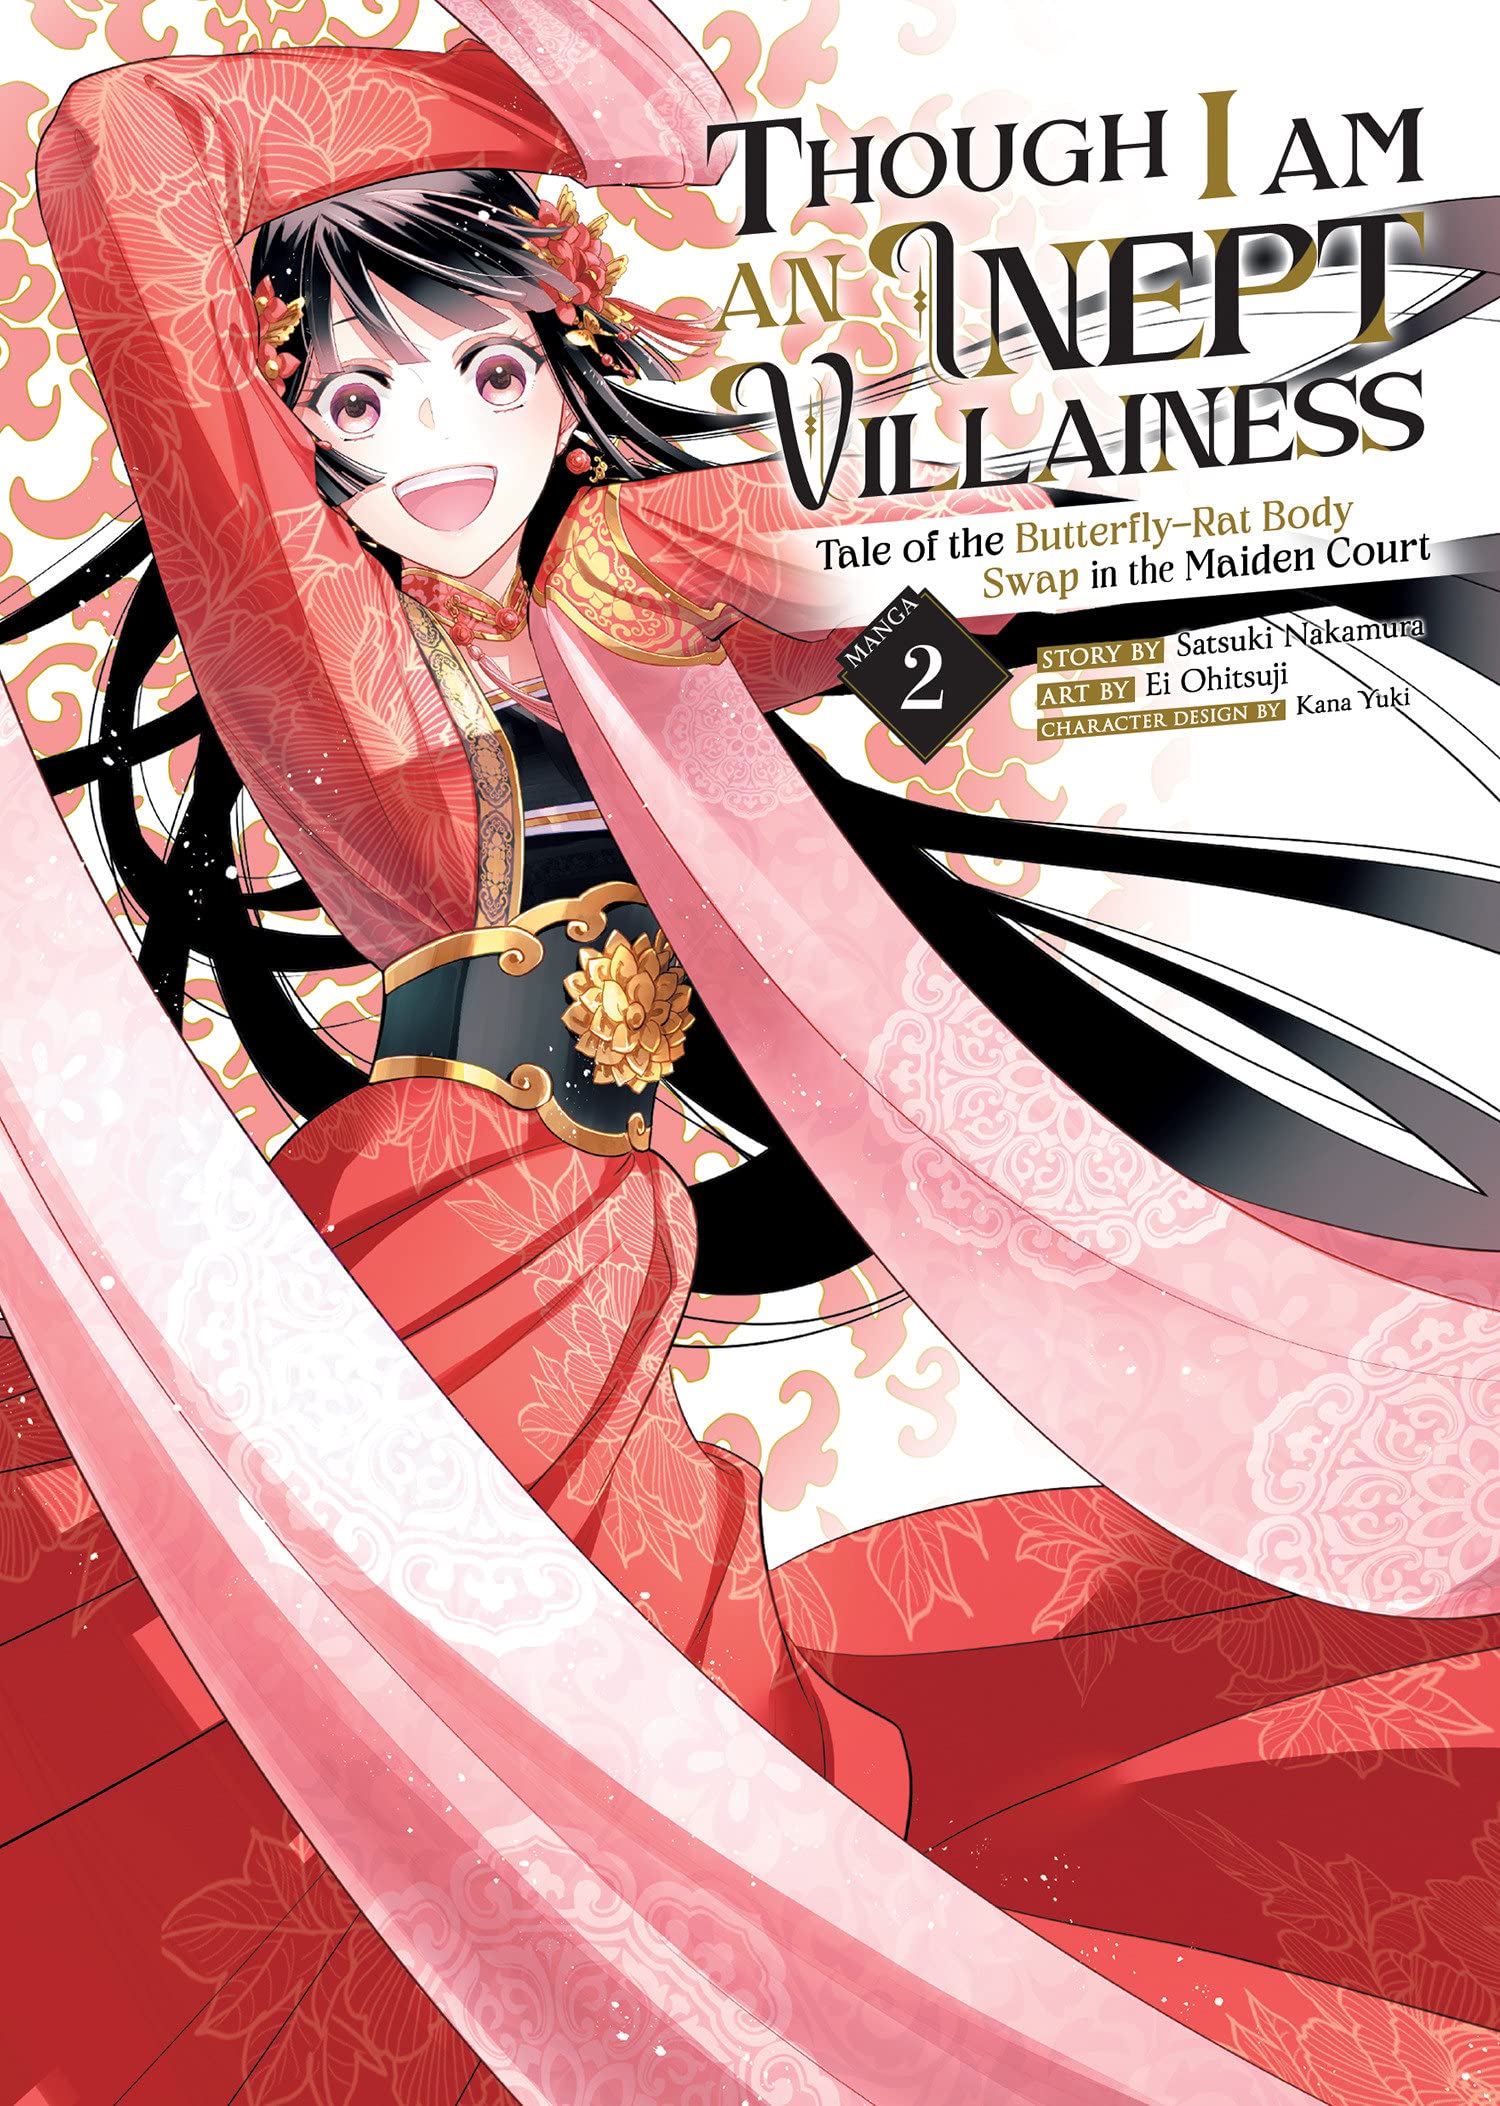 Though I Am an Inept Villainess: Tale of the Butterfly-Rat Body Swap in the Maiden Court - Volume 2